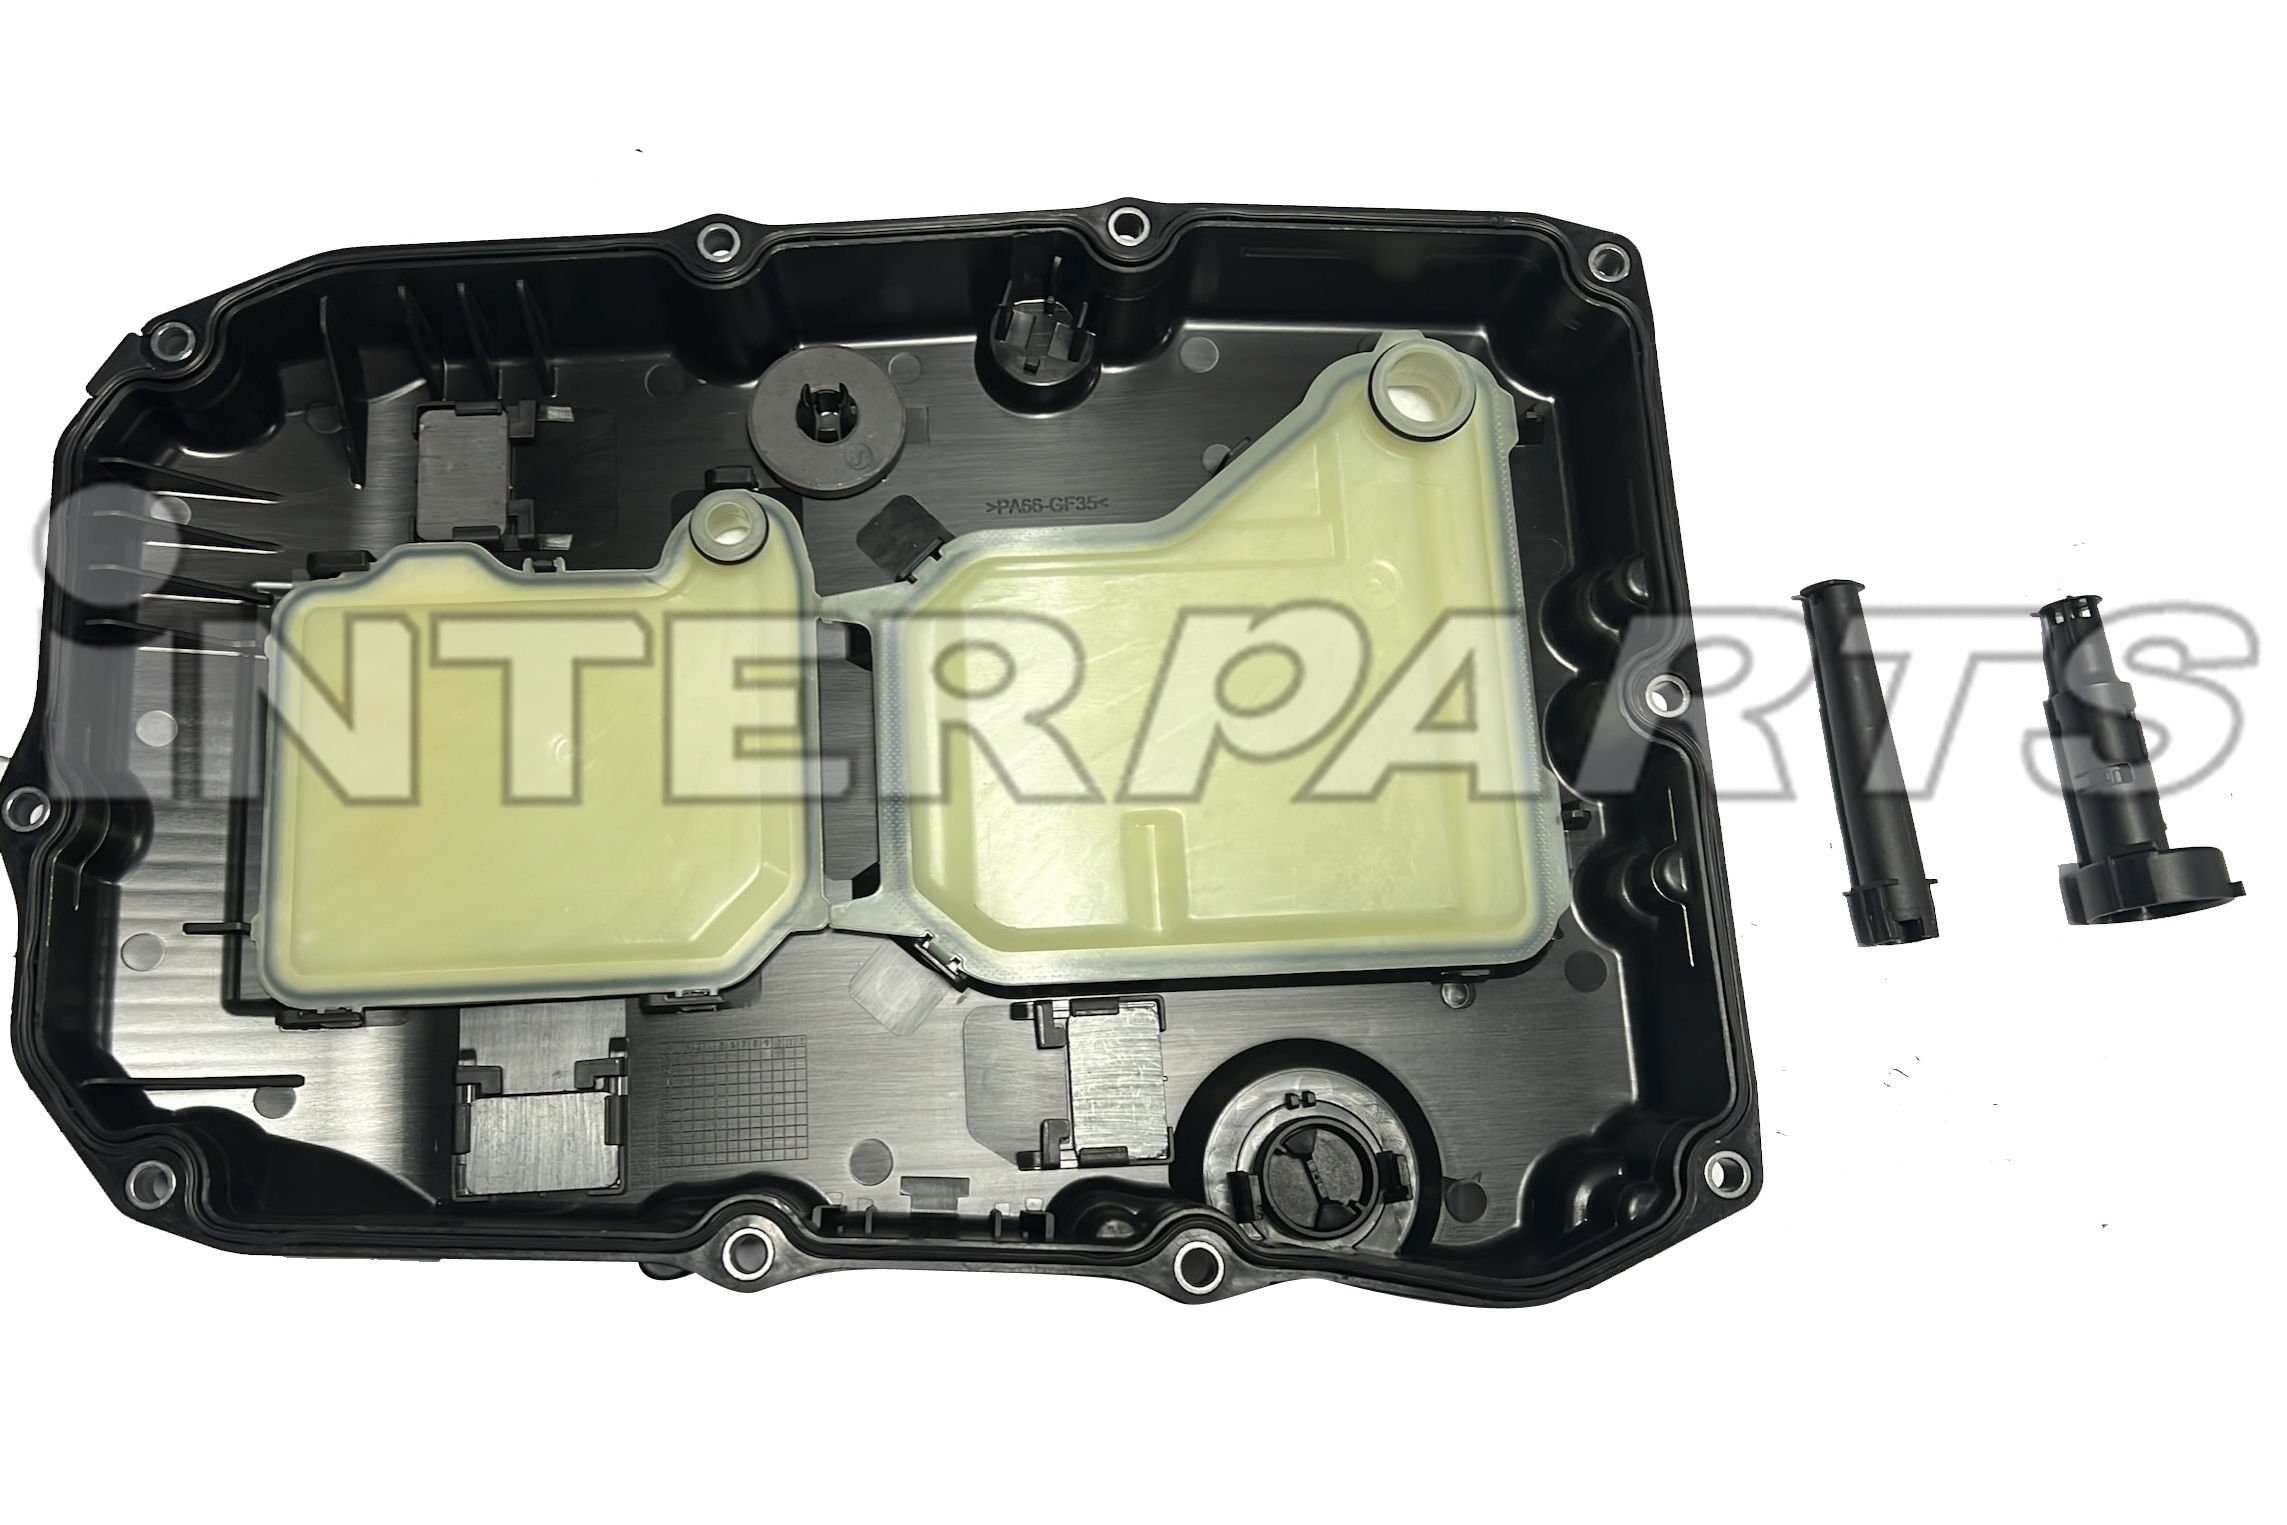 MERCEDES BENZ 호환 TRANSMISSION FILTER A7252703114 IPTS-E185AS